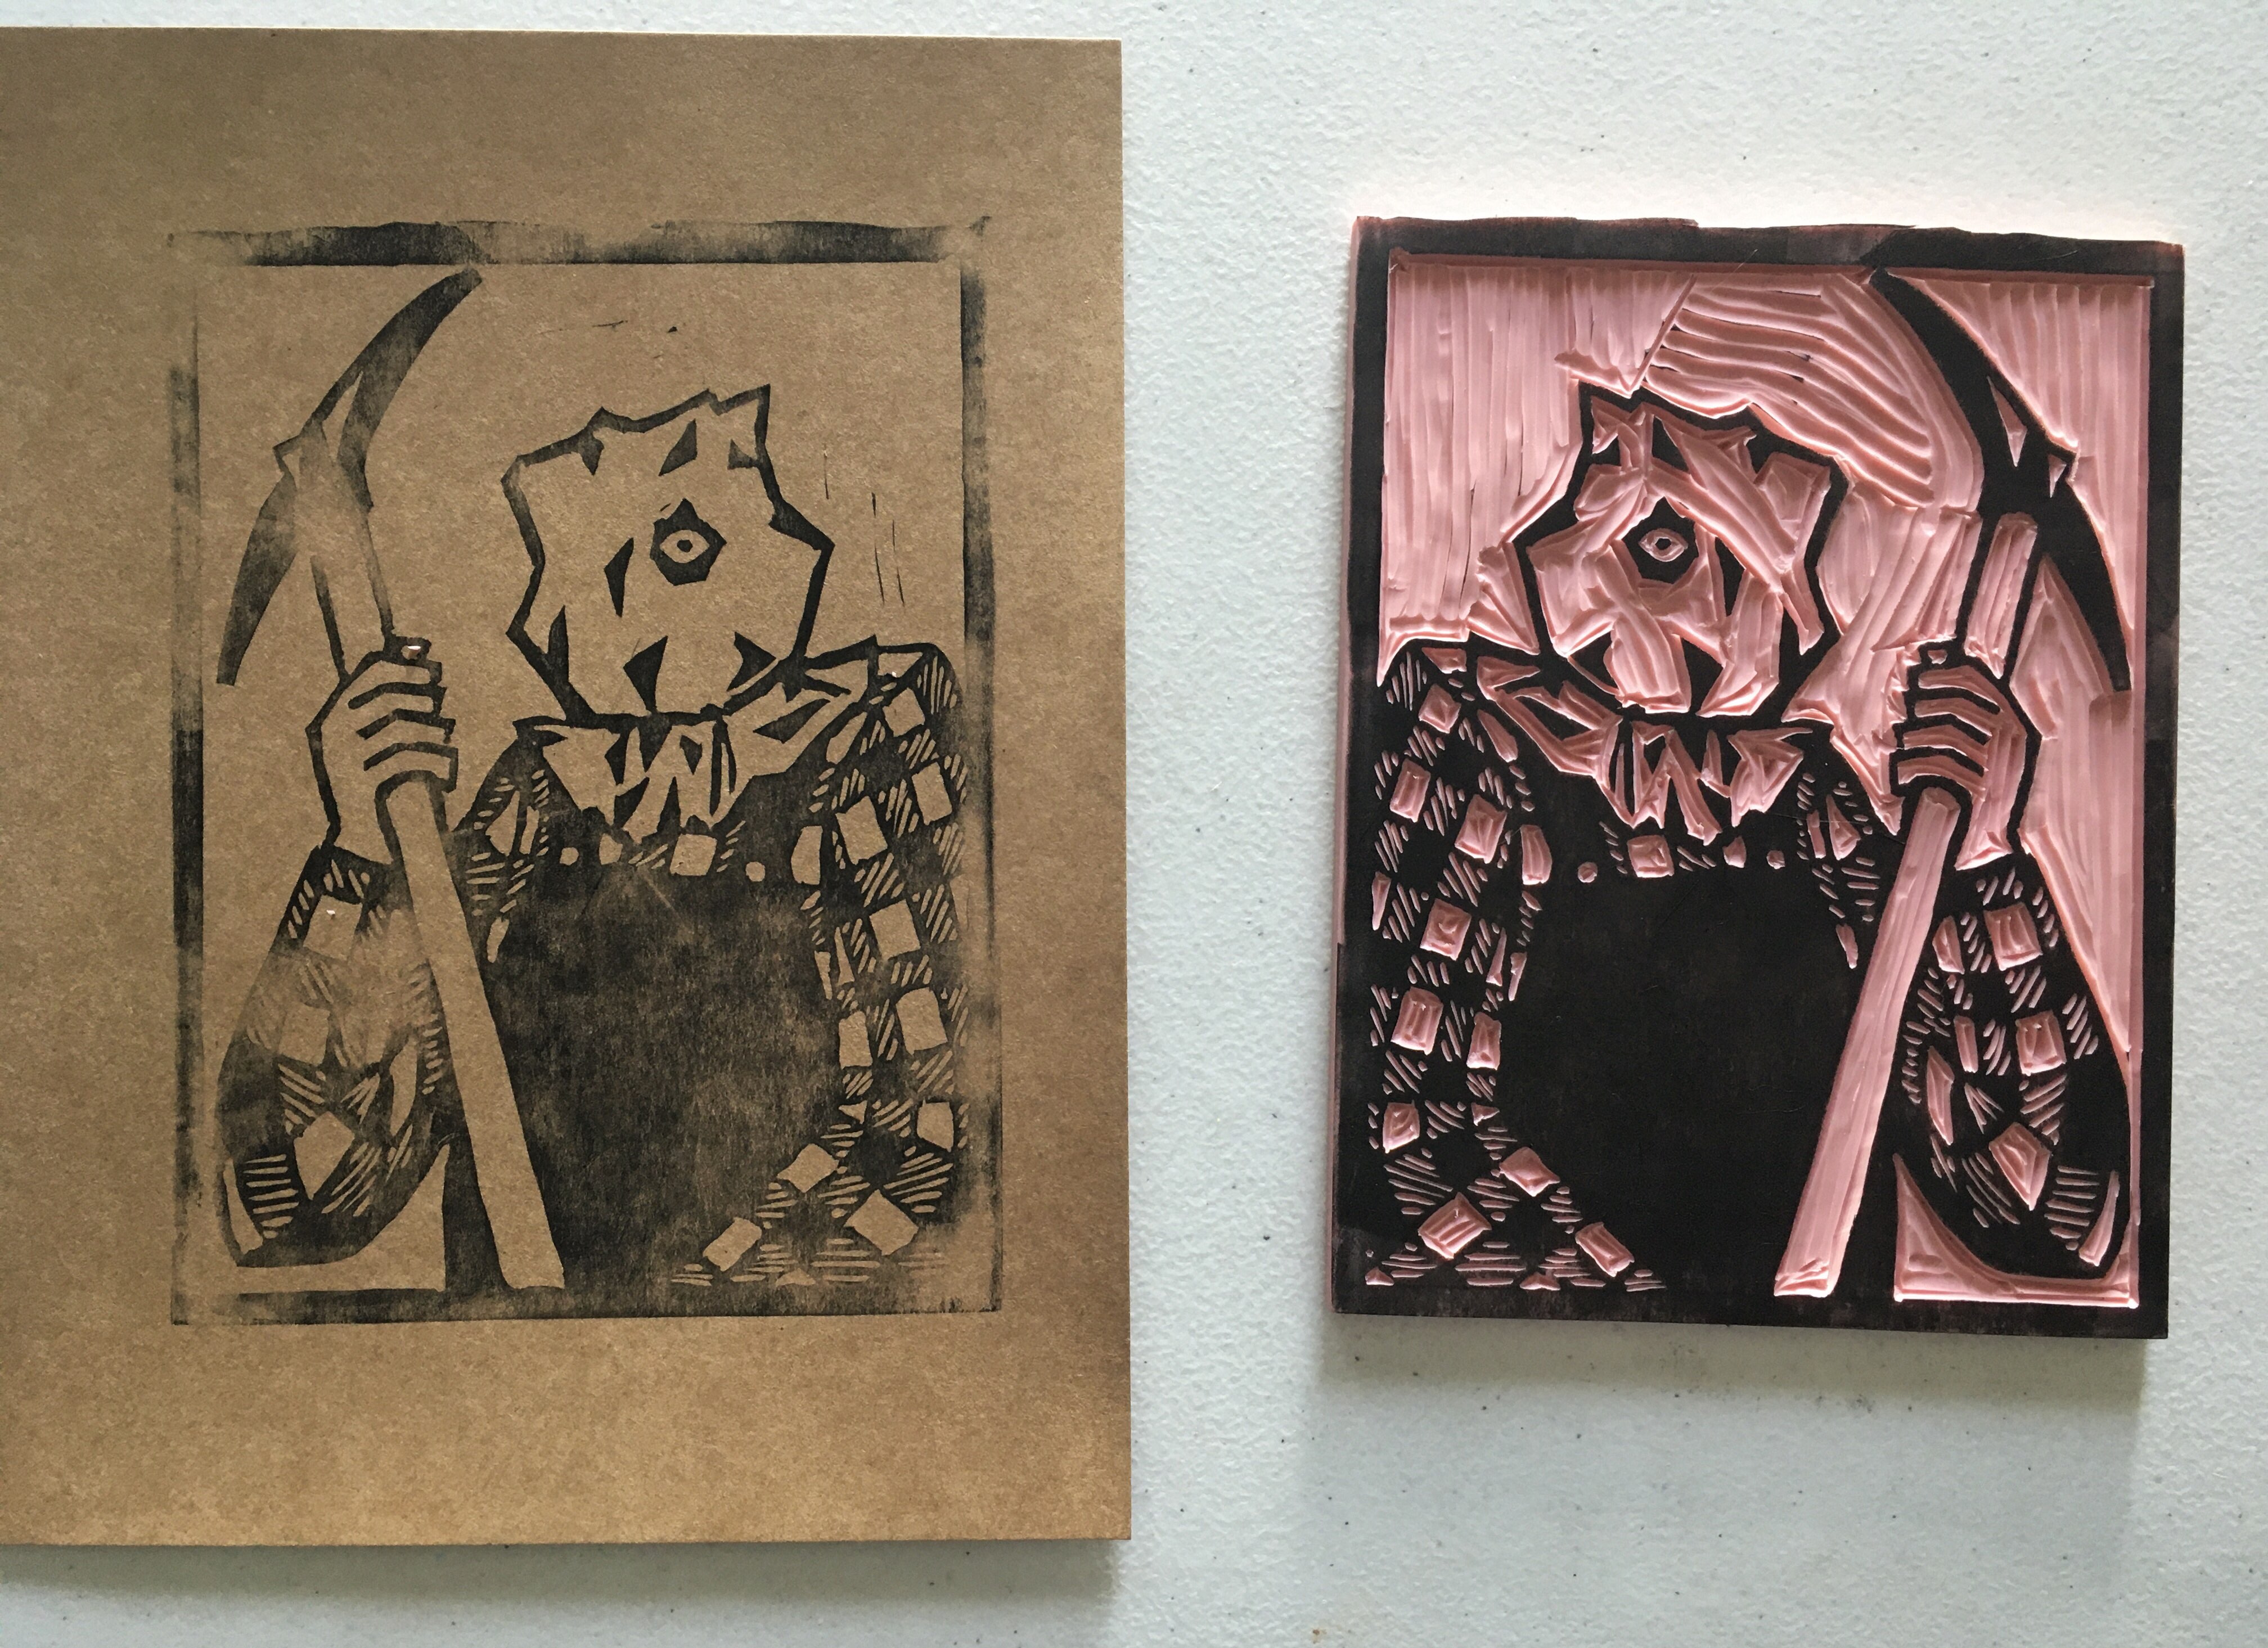 black ink blockprint on brown paper depicting jason voorhees from friday the thirteenth, part two. he has a pillowcase on his head with a hole torn out that his eye peeks through. he’s wearing a flannel shirt and overalls, and wields a pickaxe. to the left, a pink rubber block is carved with the same design, flipped horizontally